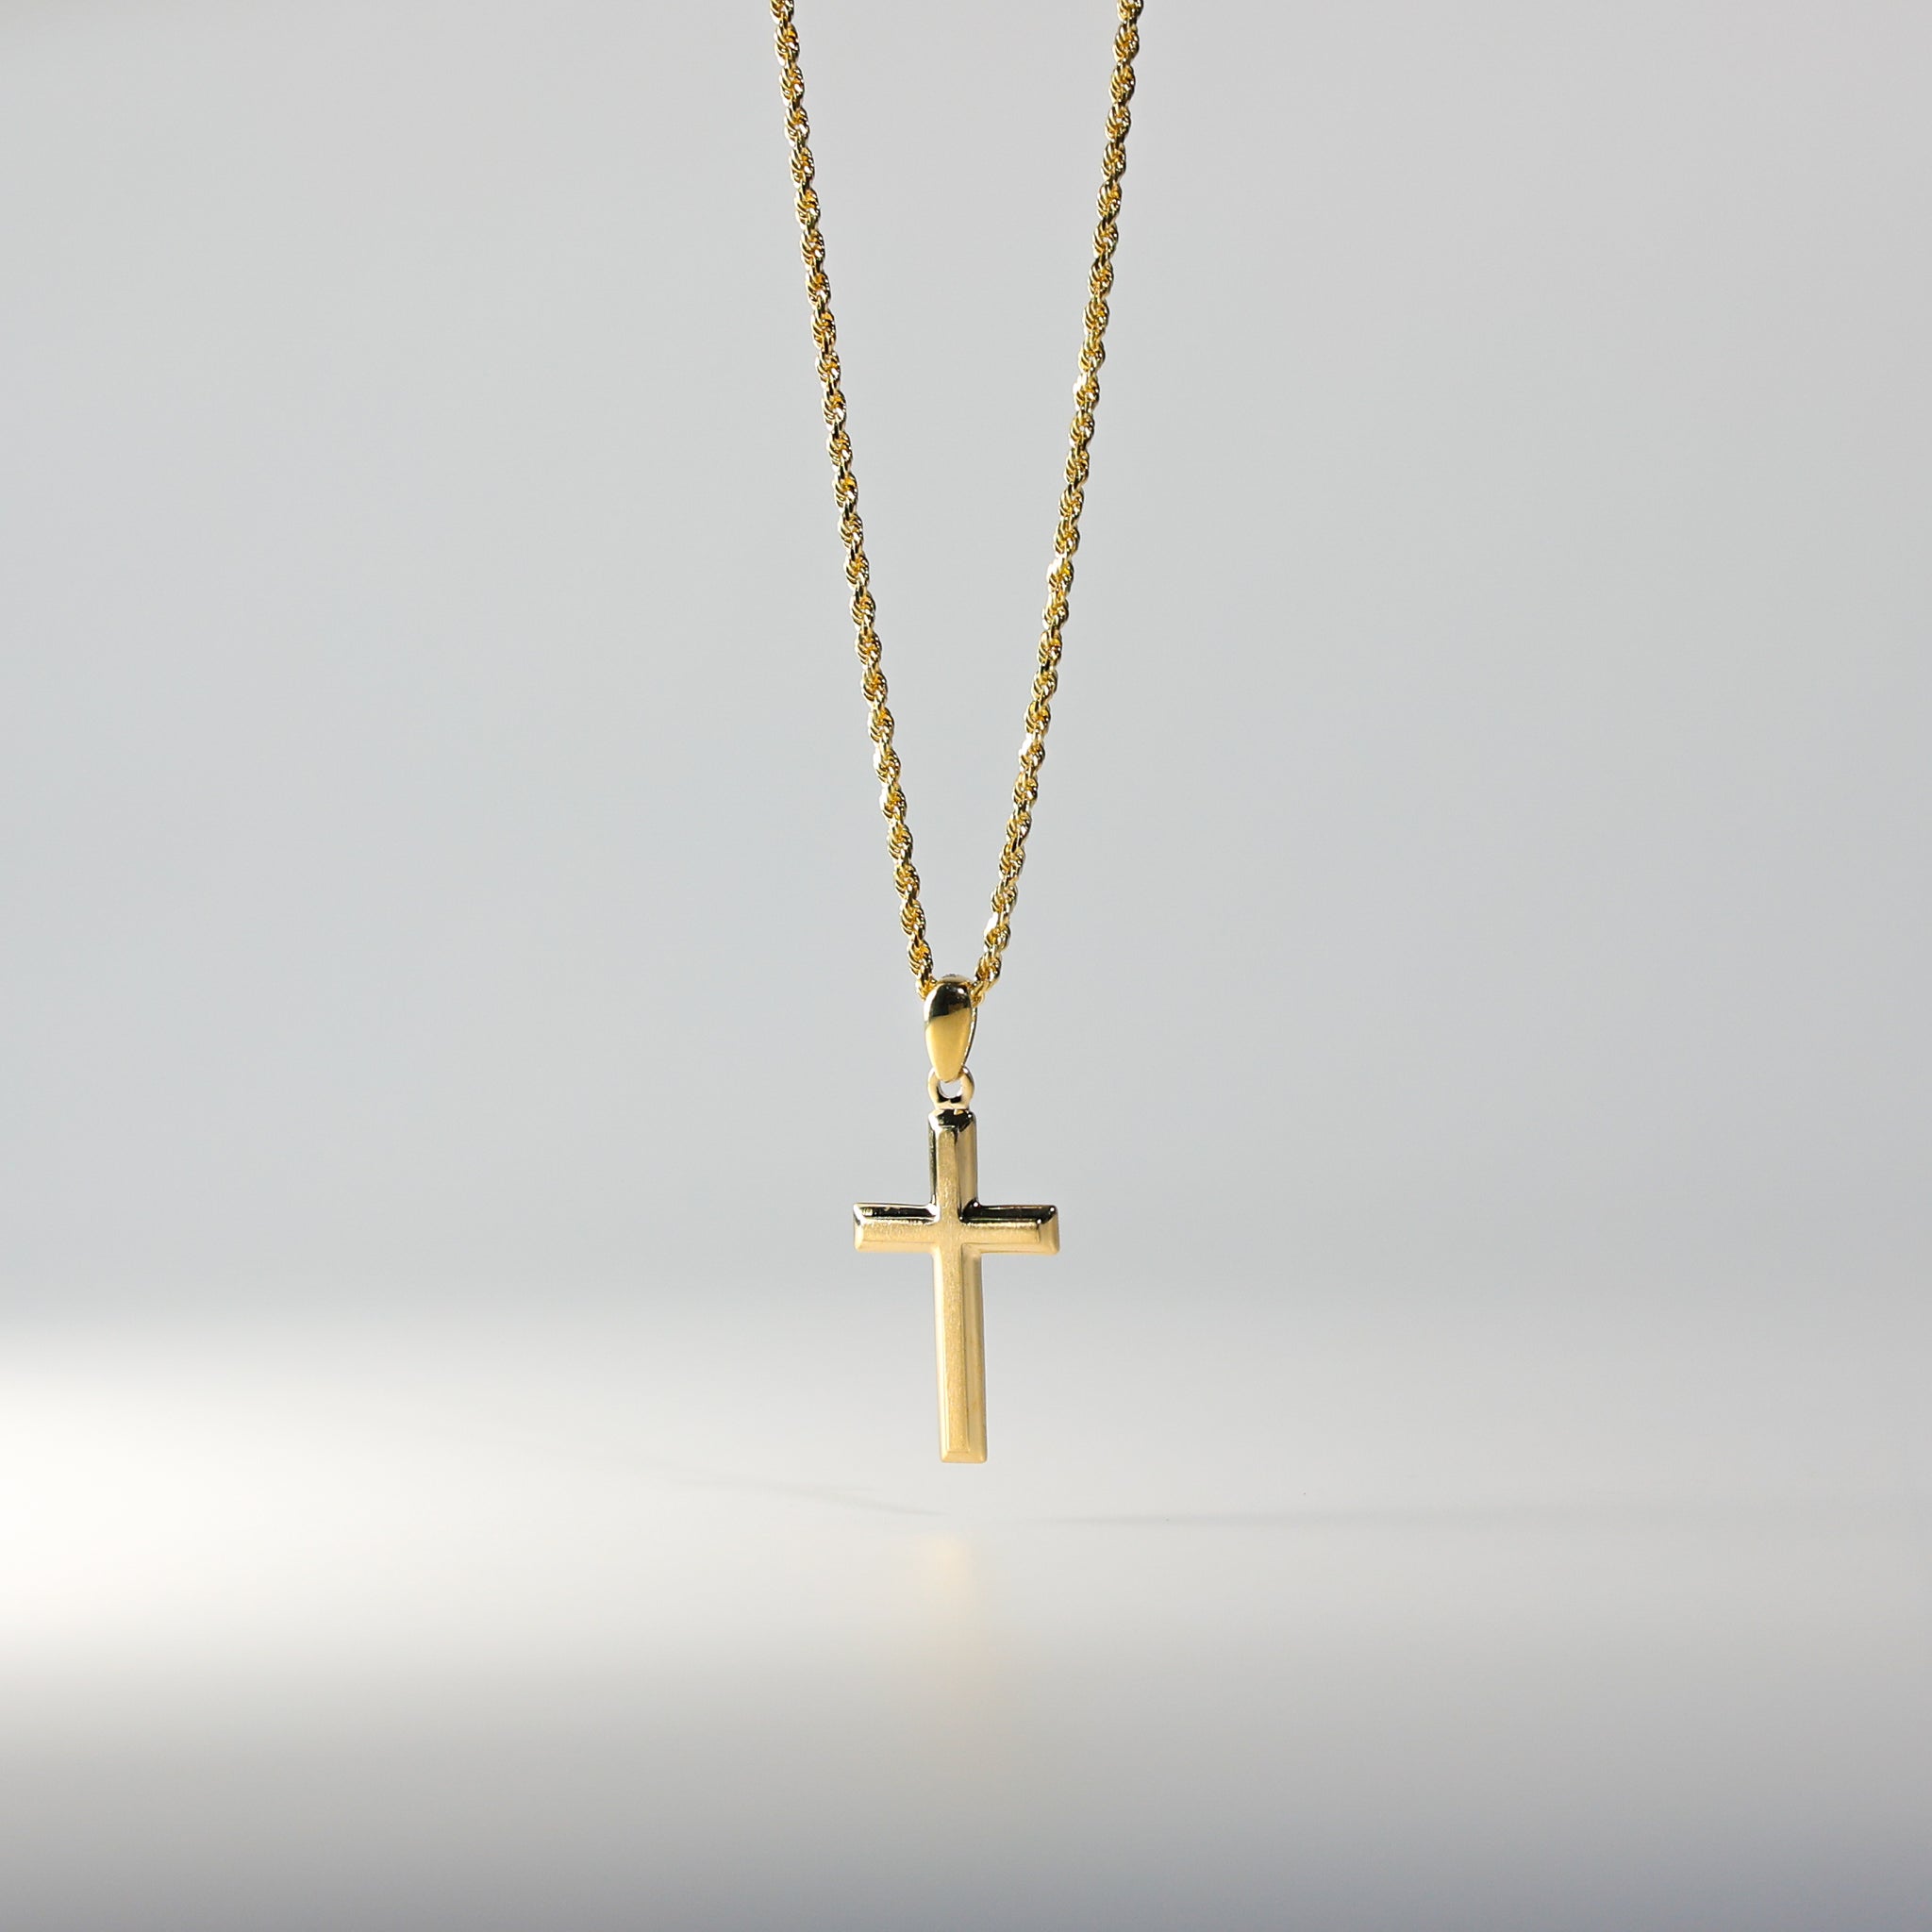 Classic Gold Cross Religious Pendant Model-0126 - Charlie & Co. Jewelry